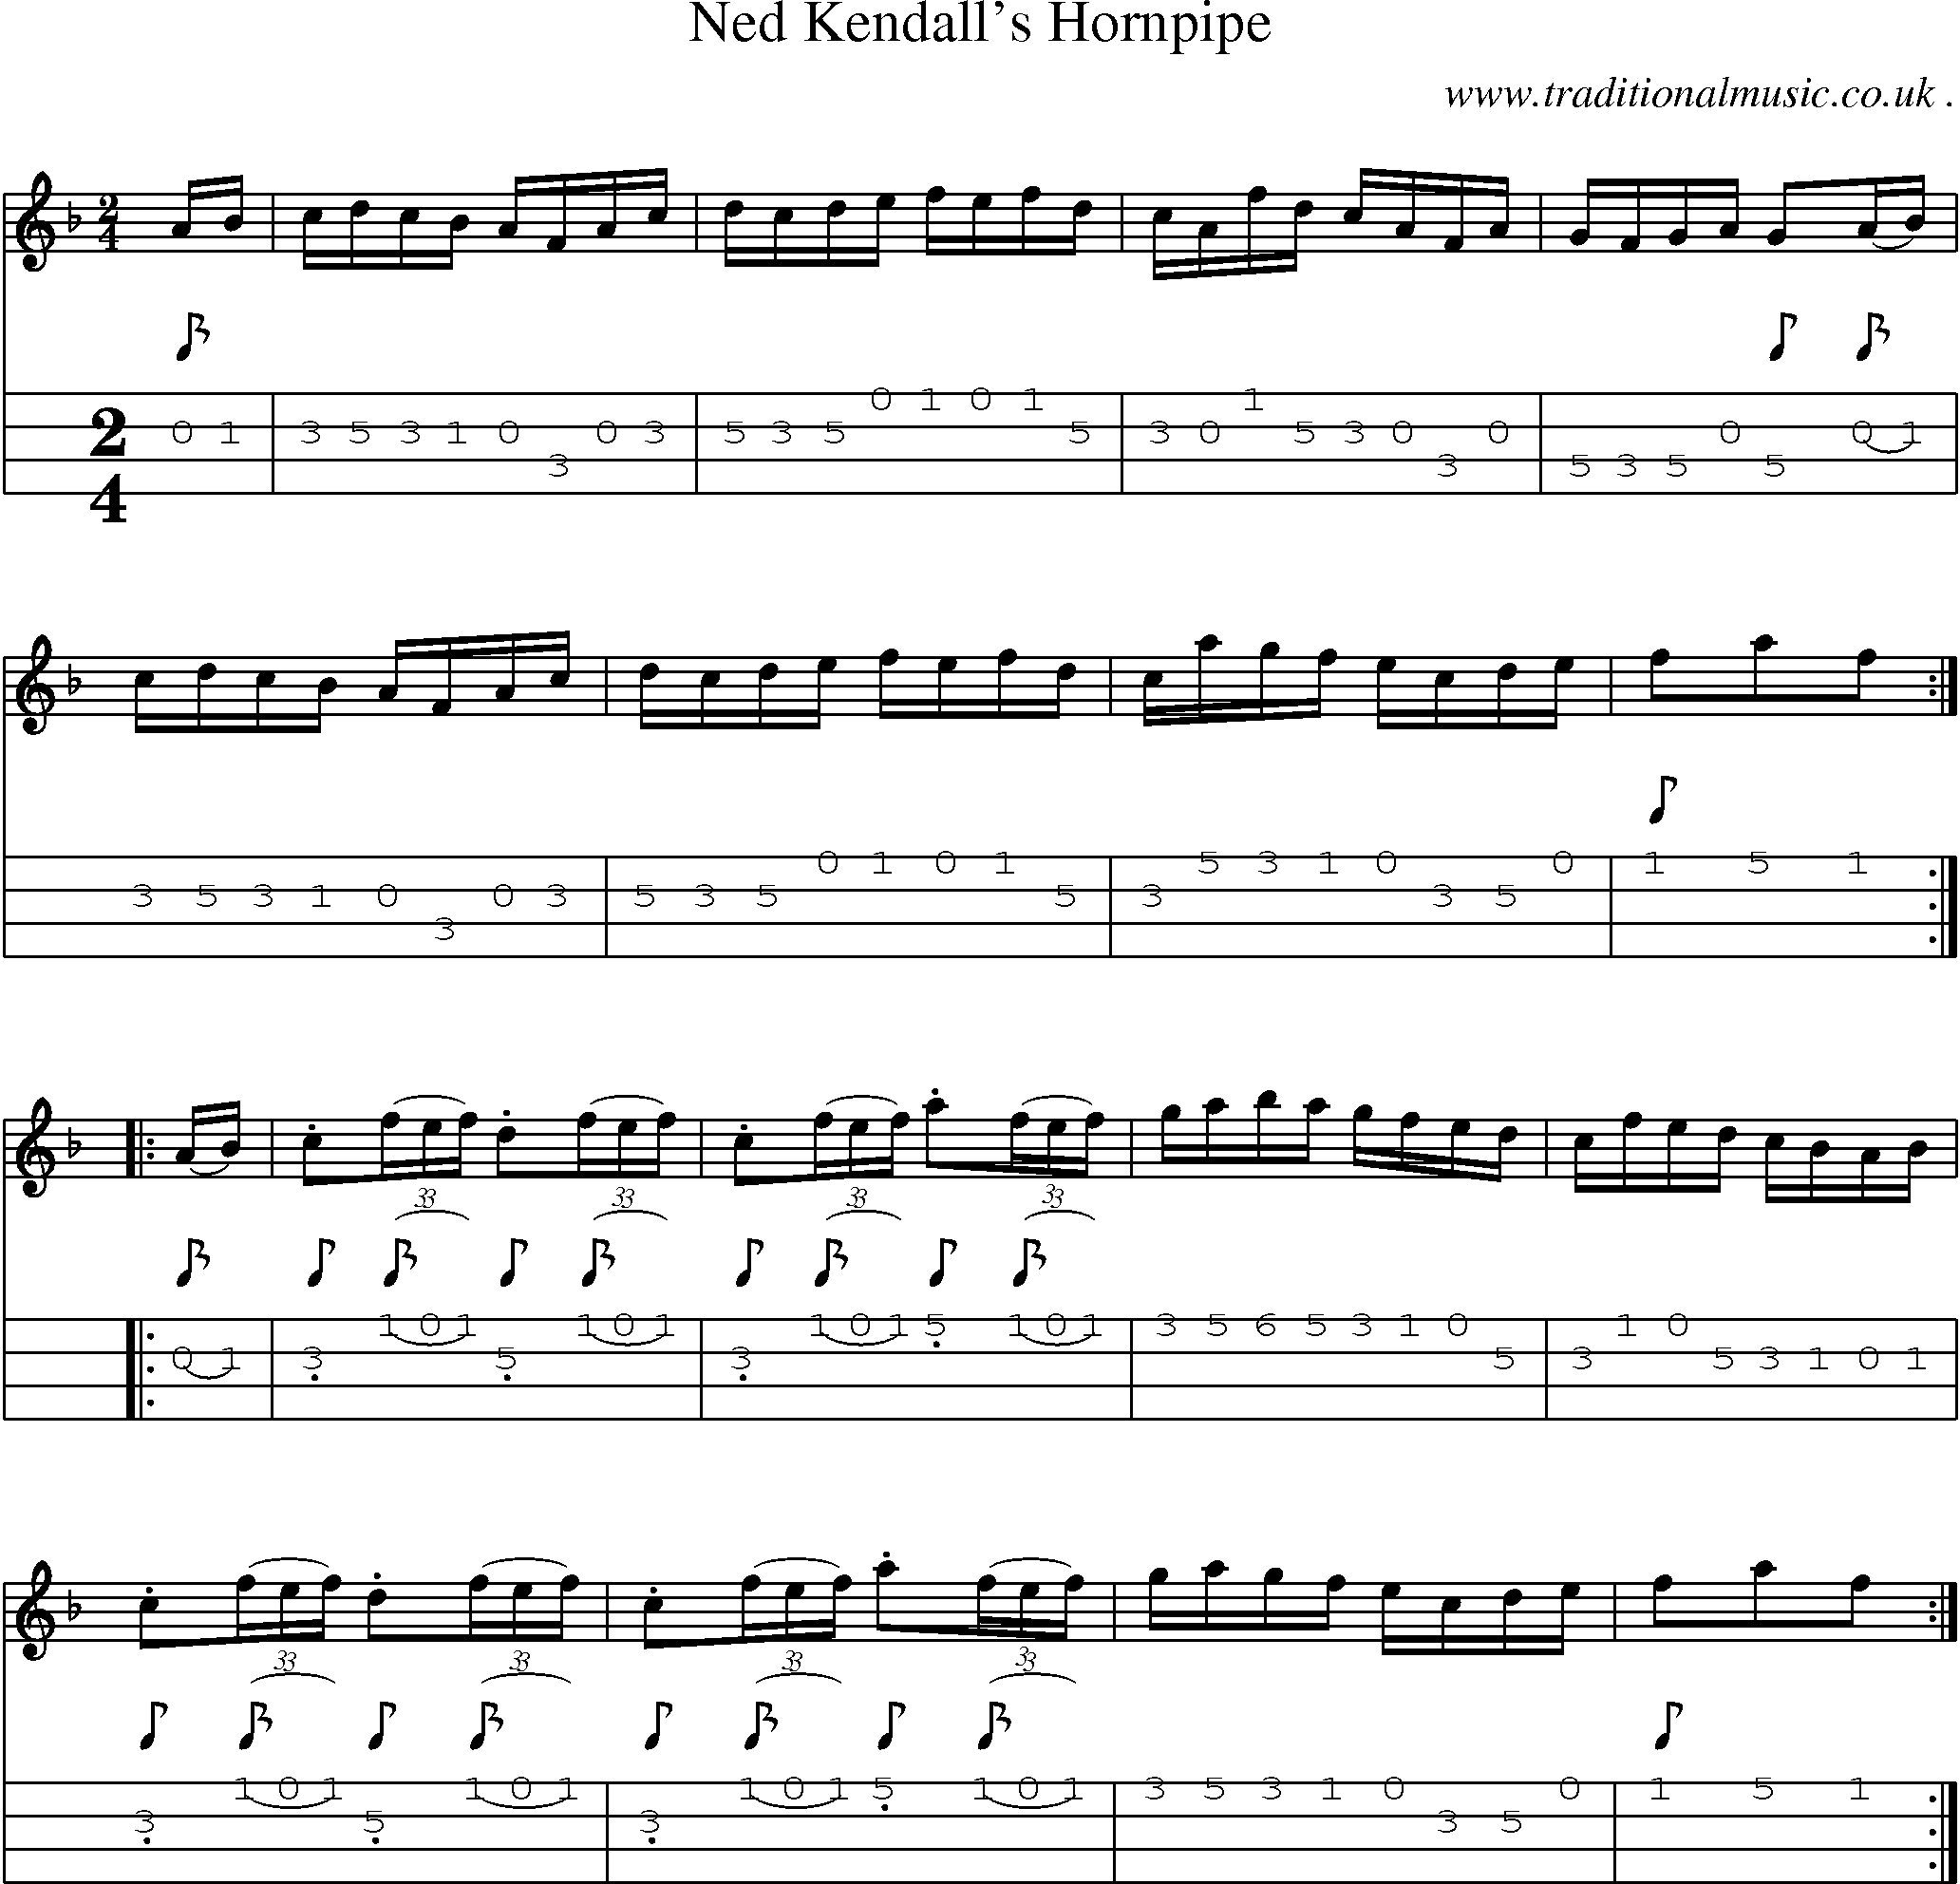 Sheet-Music and Mandolin Tabs for Ned Kendalls Hornpipe